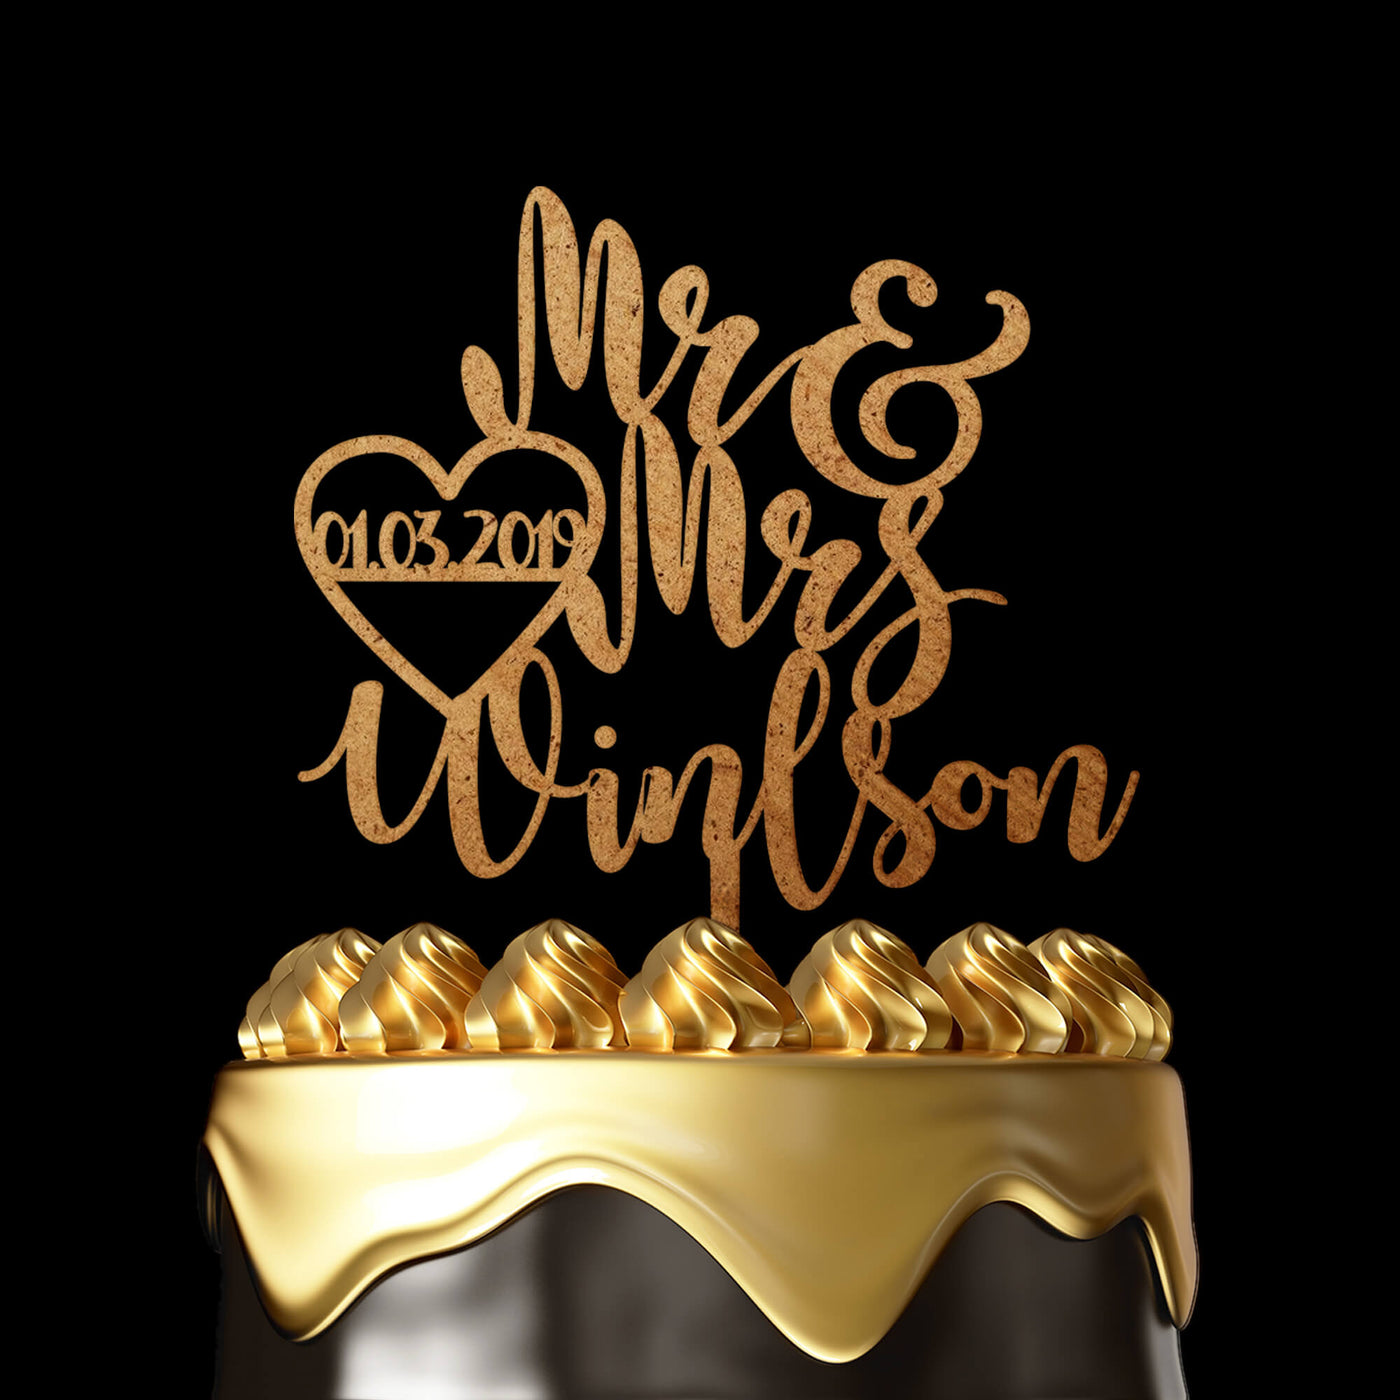 Personalized Cake Topper Henderson - Wedding Cake Topper by Luxtomi